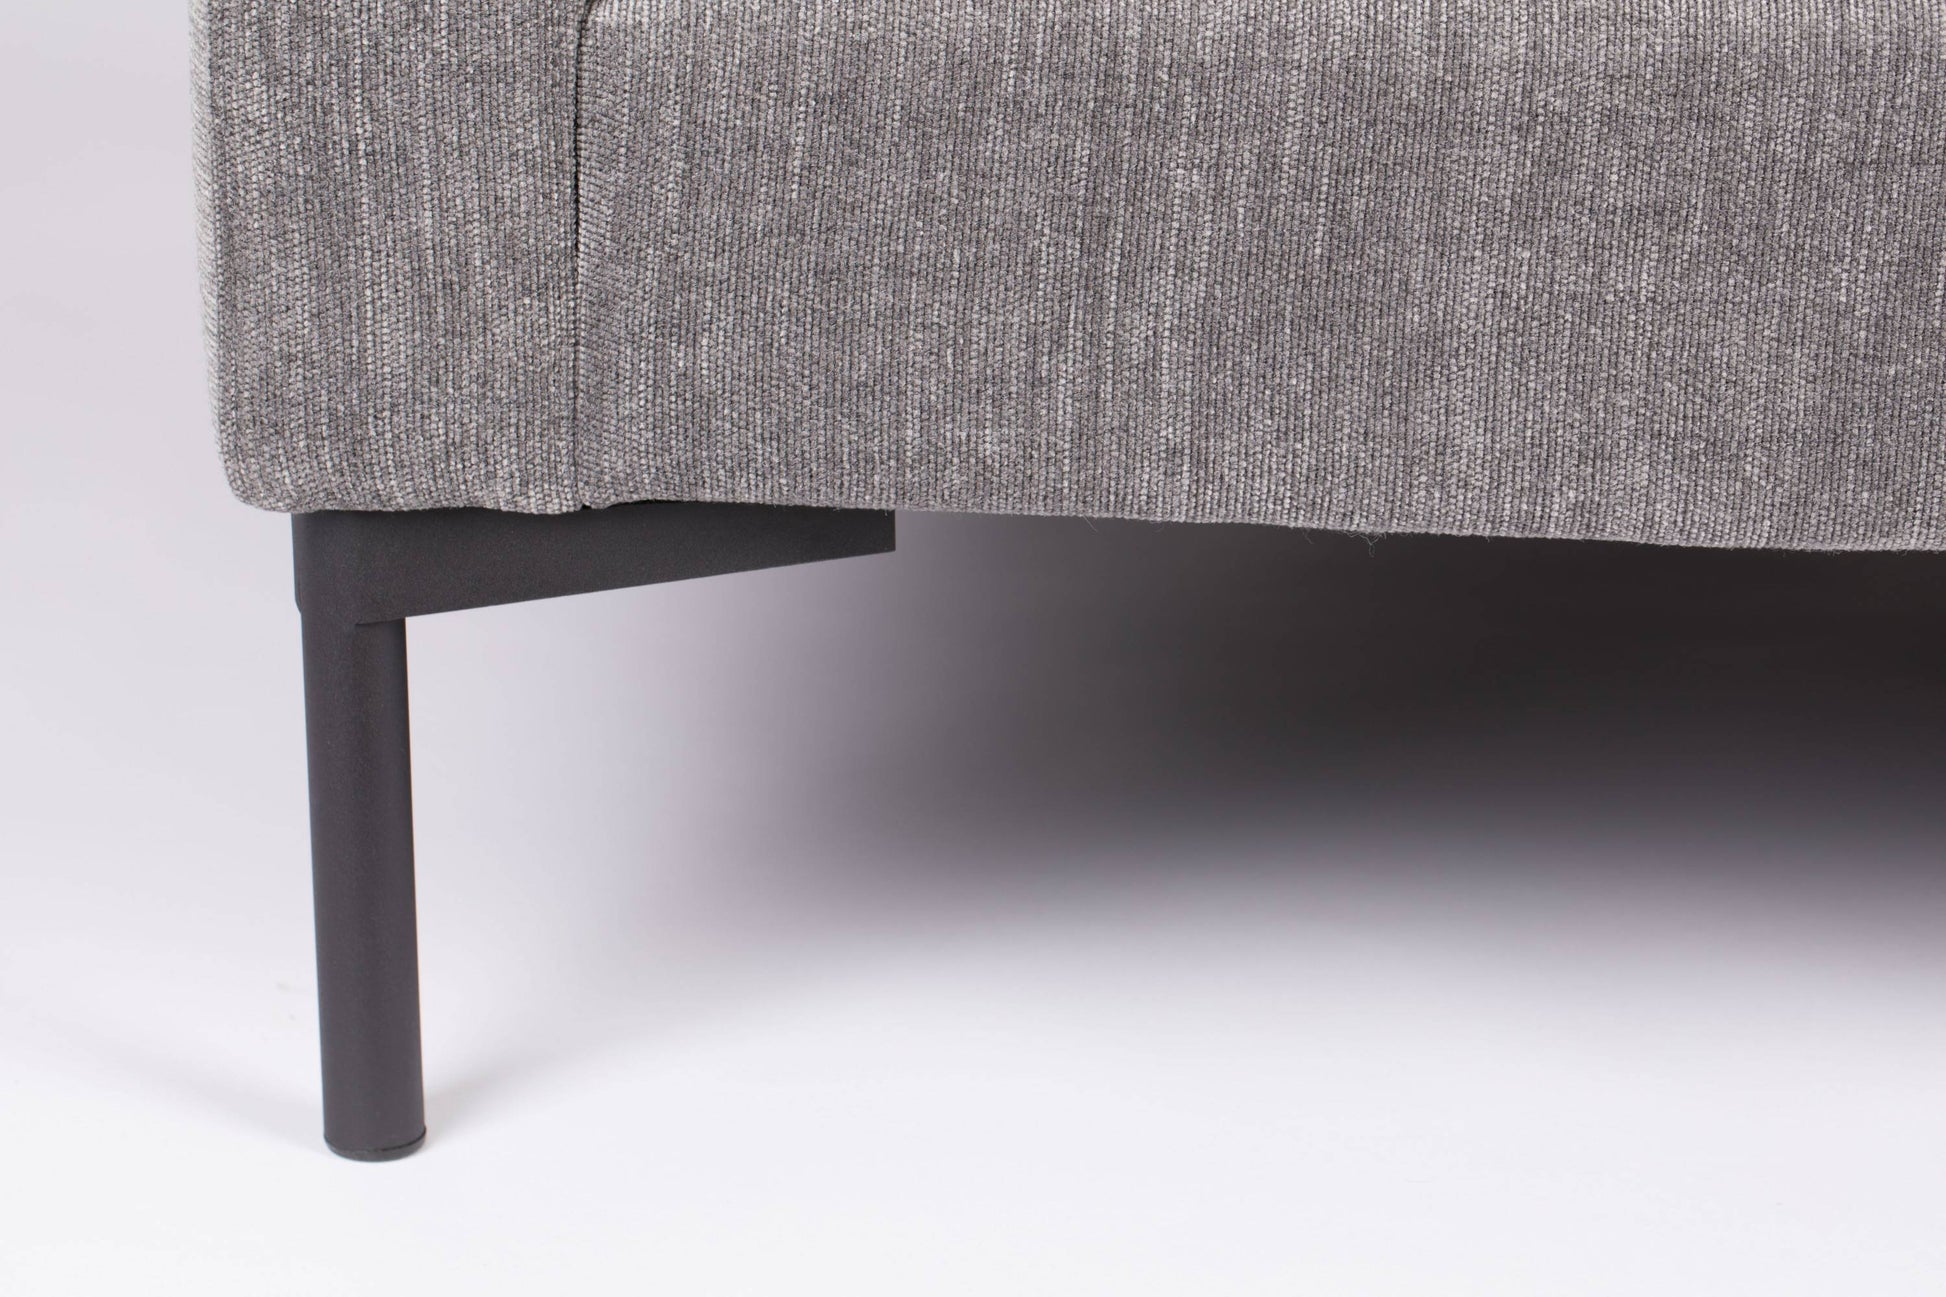 Zuiver | SOFA SUMMER 3-SEATER ANTHRACITE Default Title